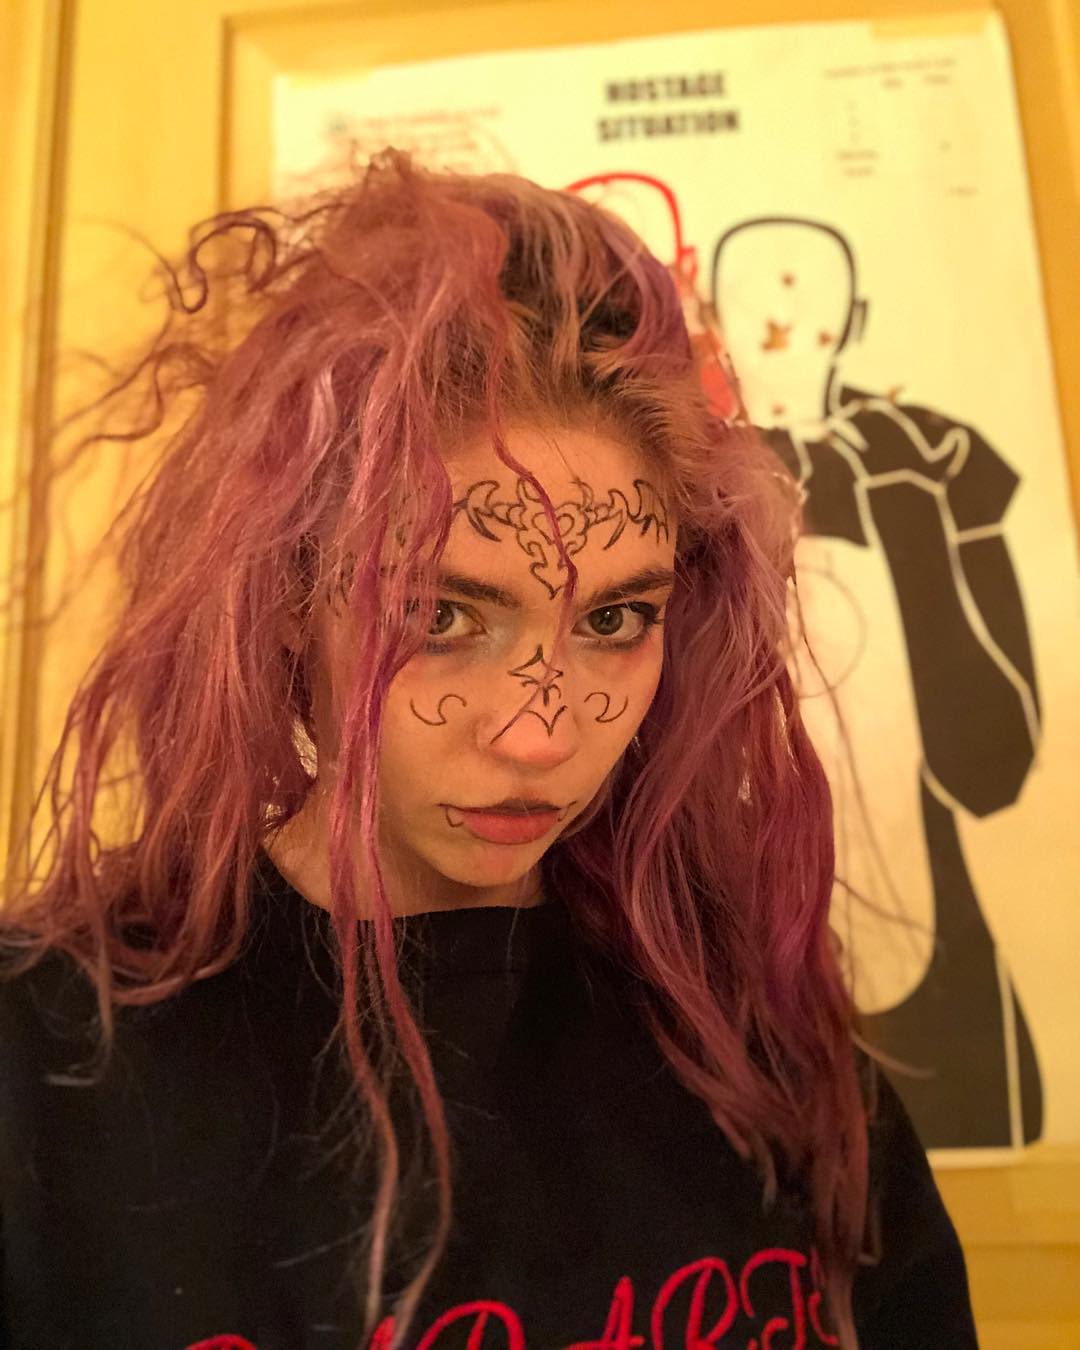 The artist now known as simply “c” intends to “kill off” Grimes moniker